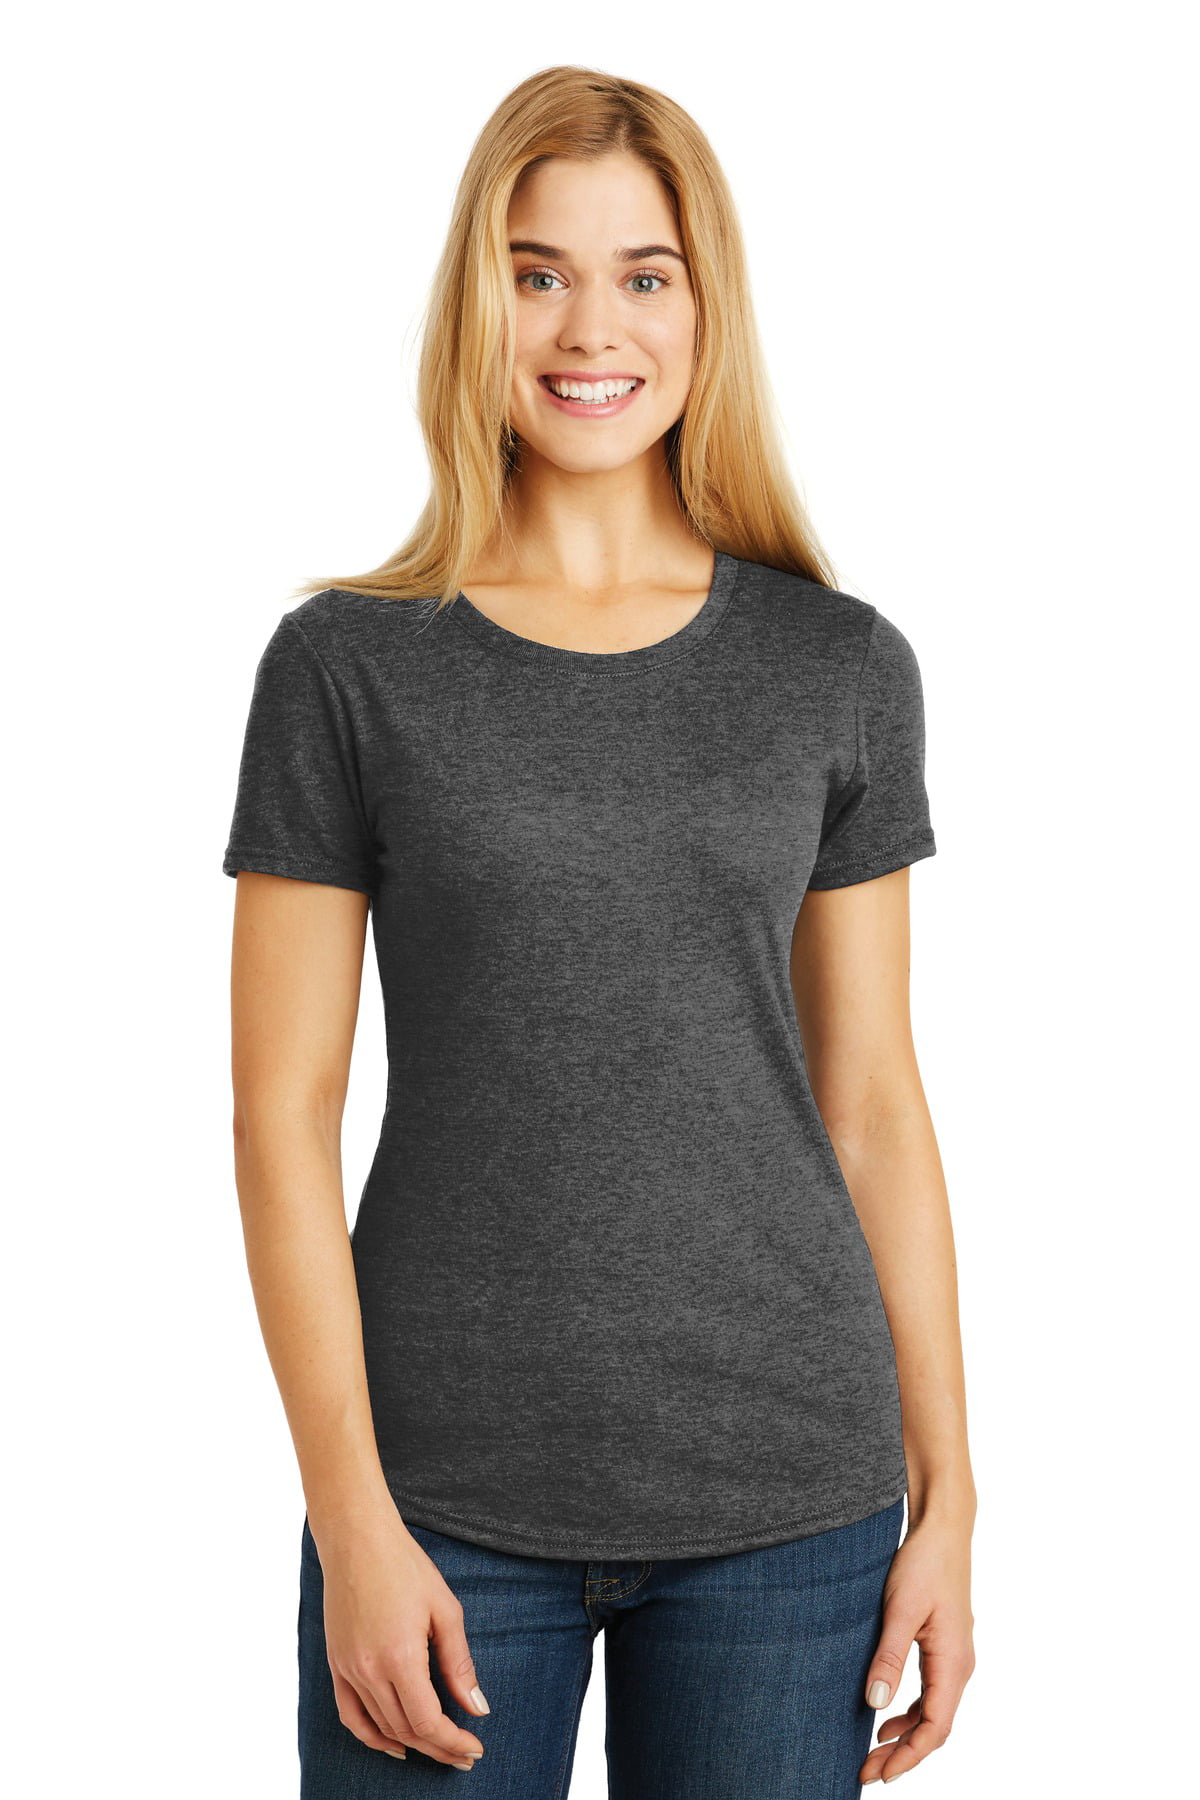 Troubled Systematically use Anvil Women's Short Sleeve Tri-Blend T-Shirt - 6750L - Walmart.com